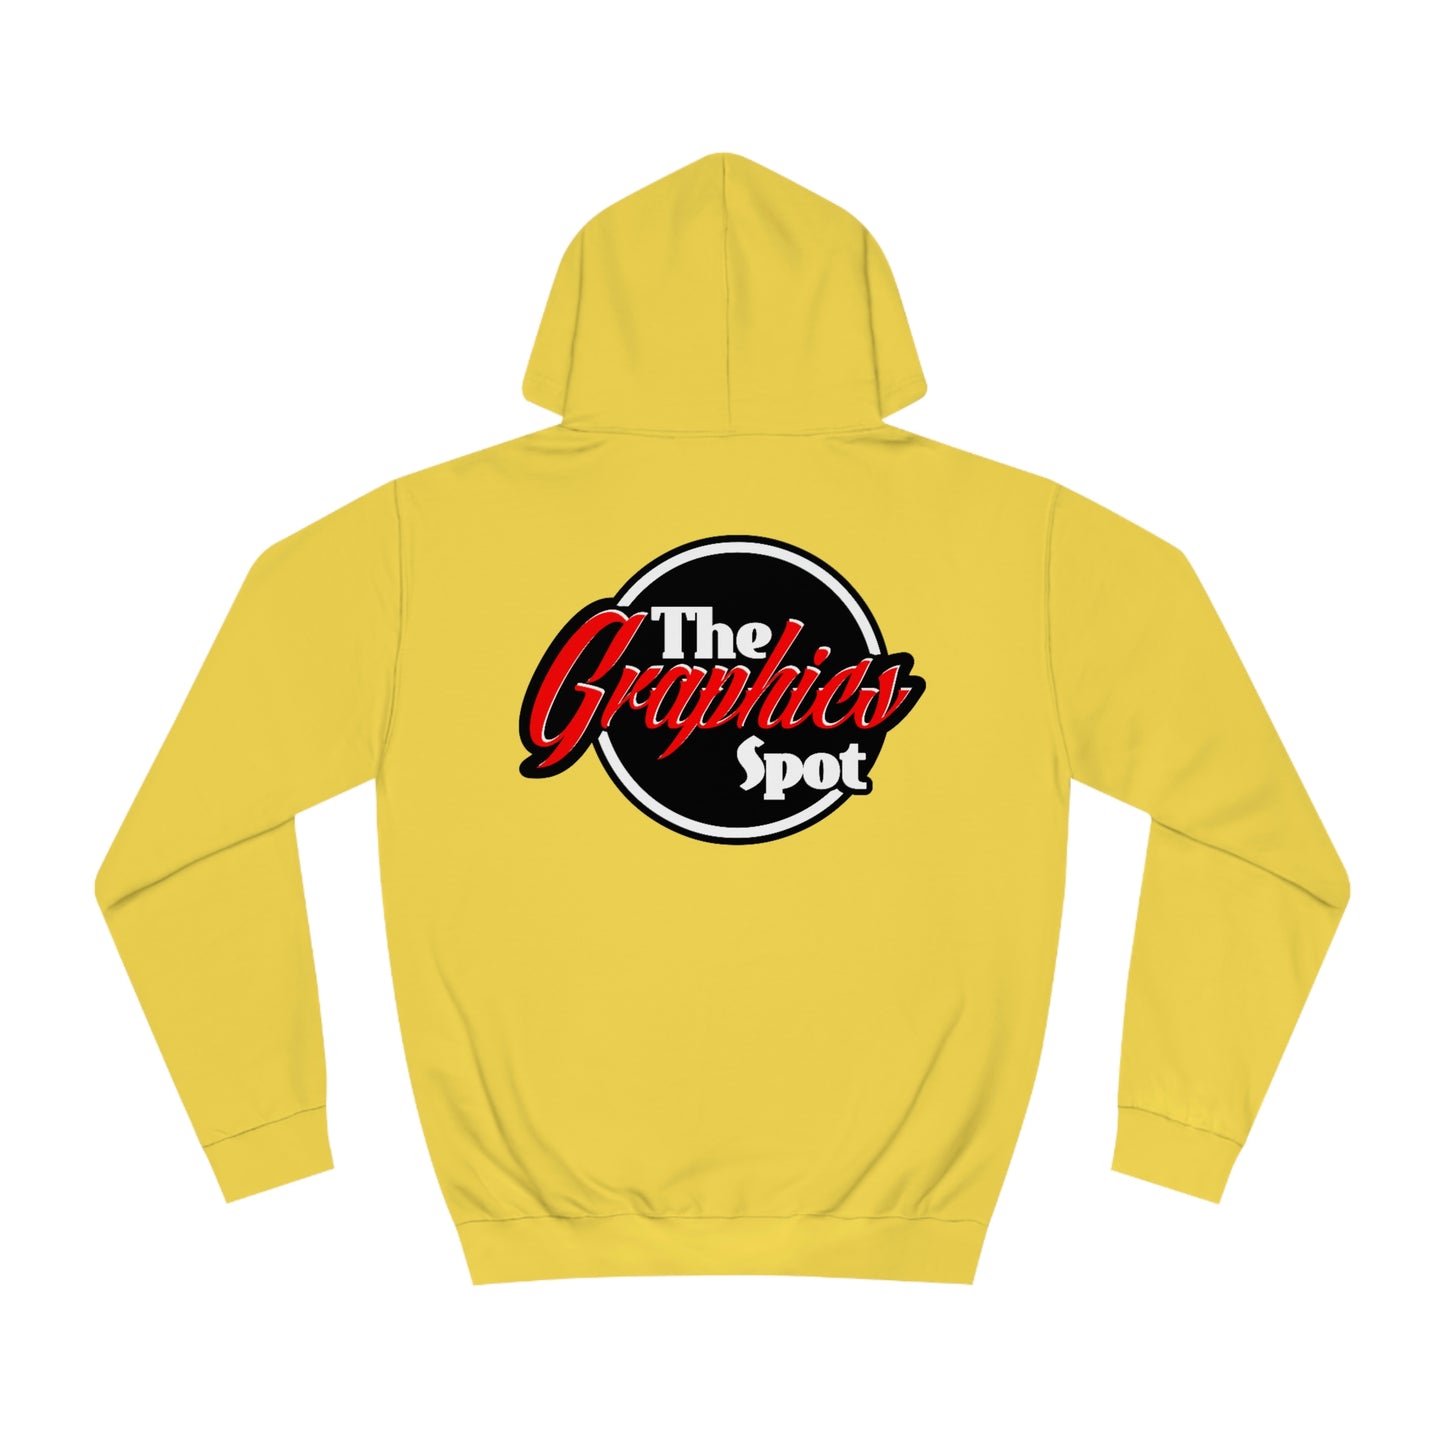 The Graphics Spot Med/Heavy Hoodie